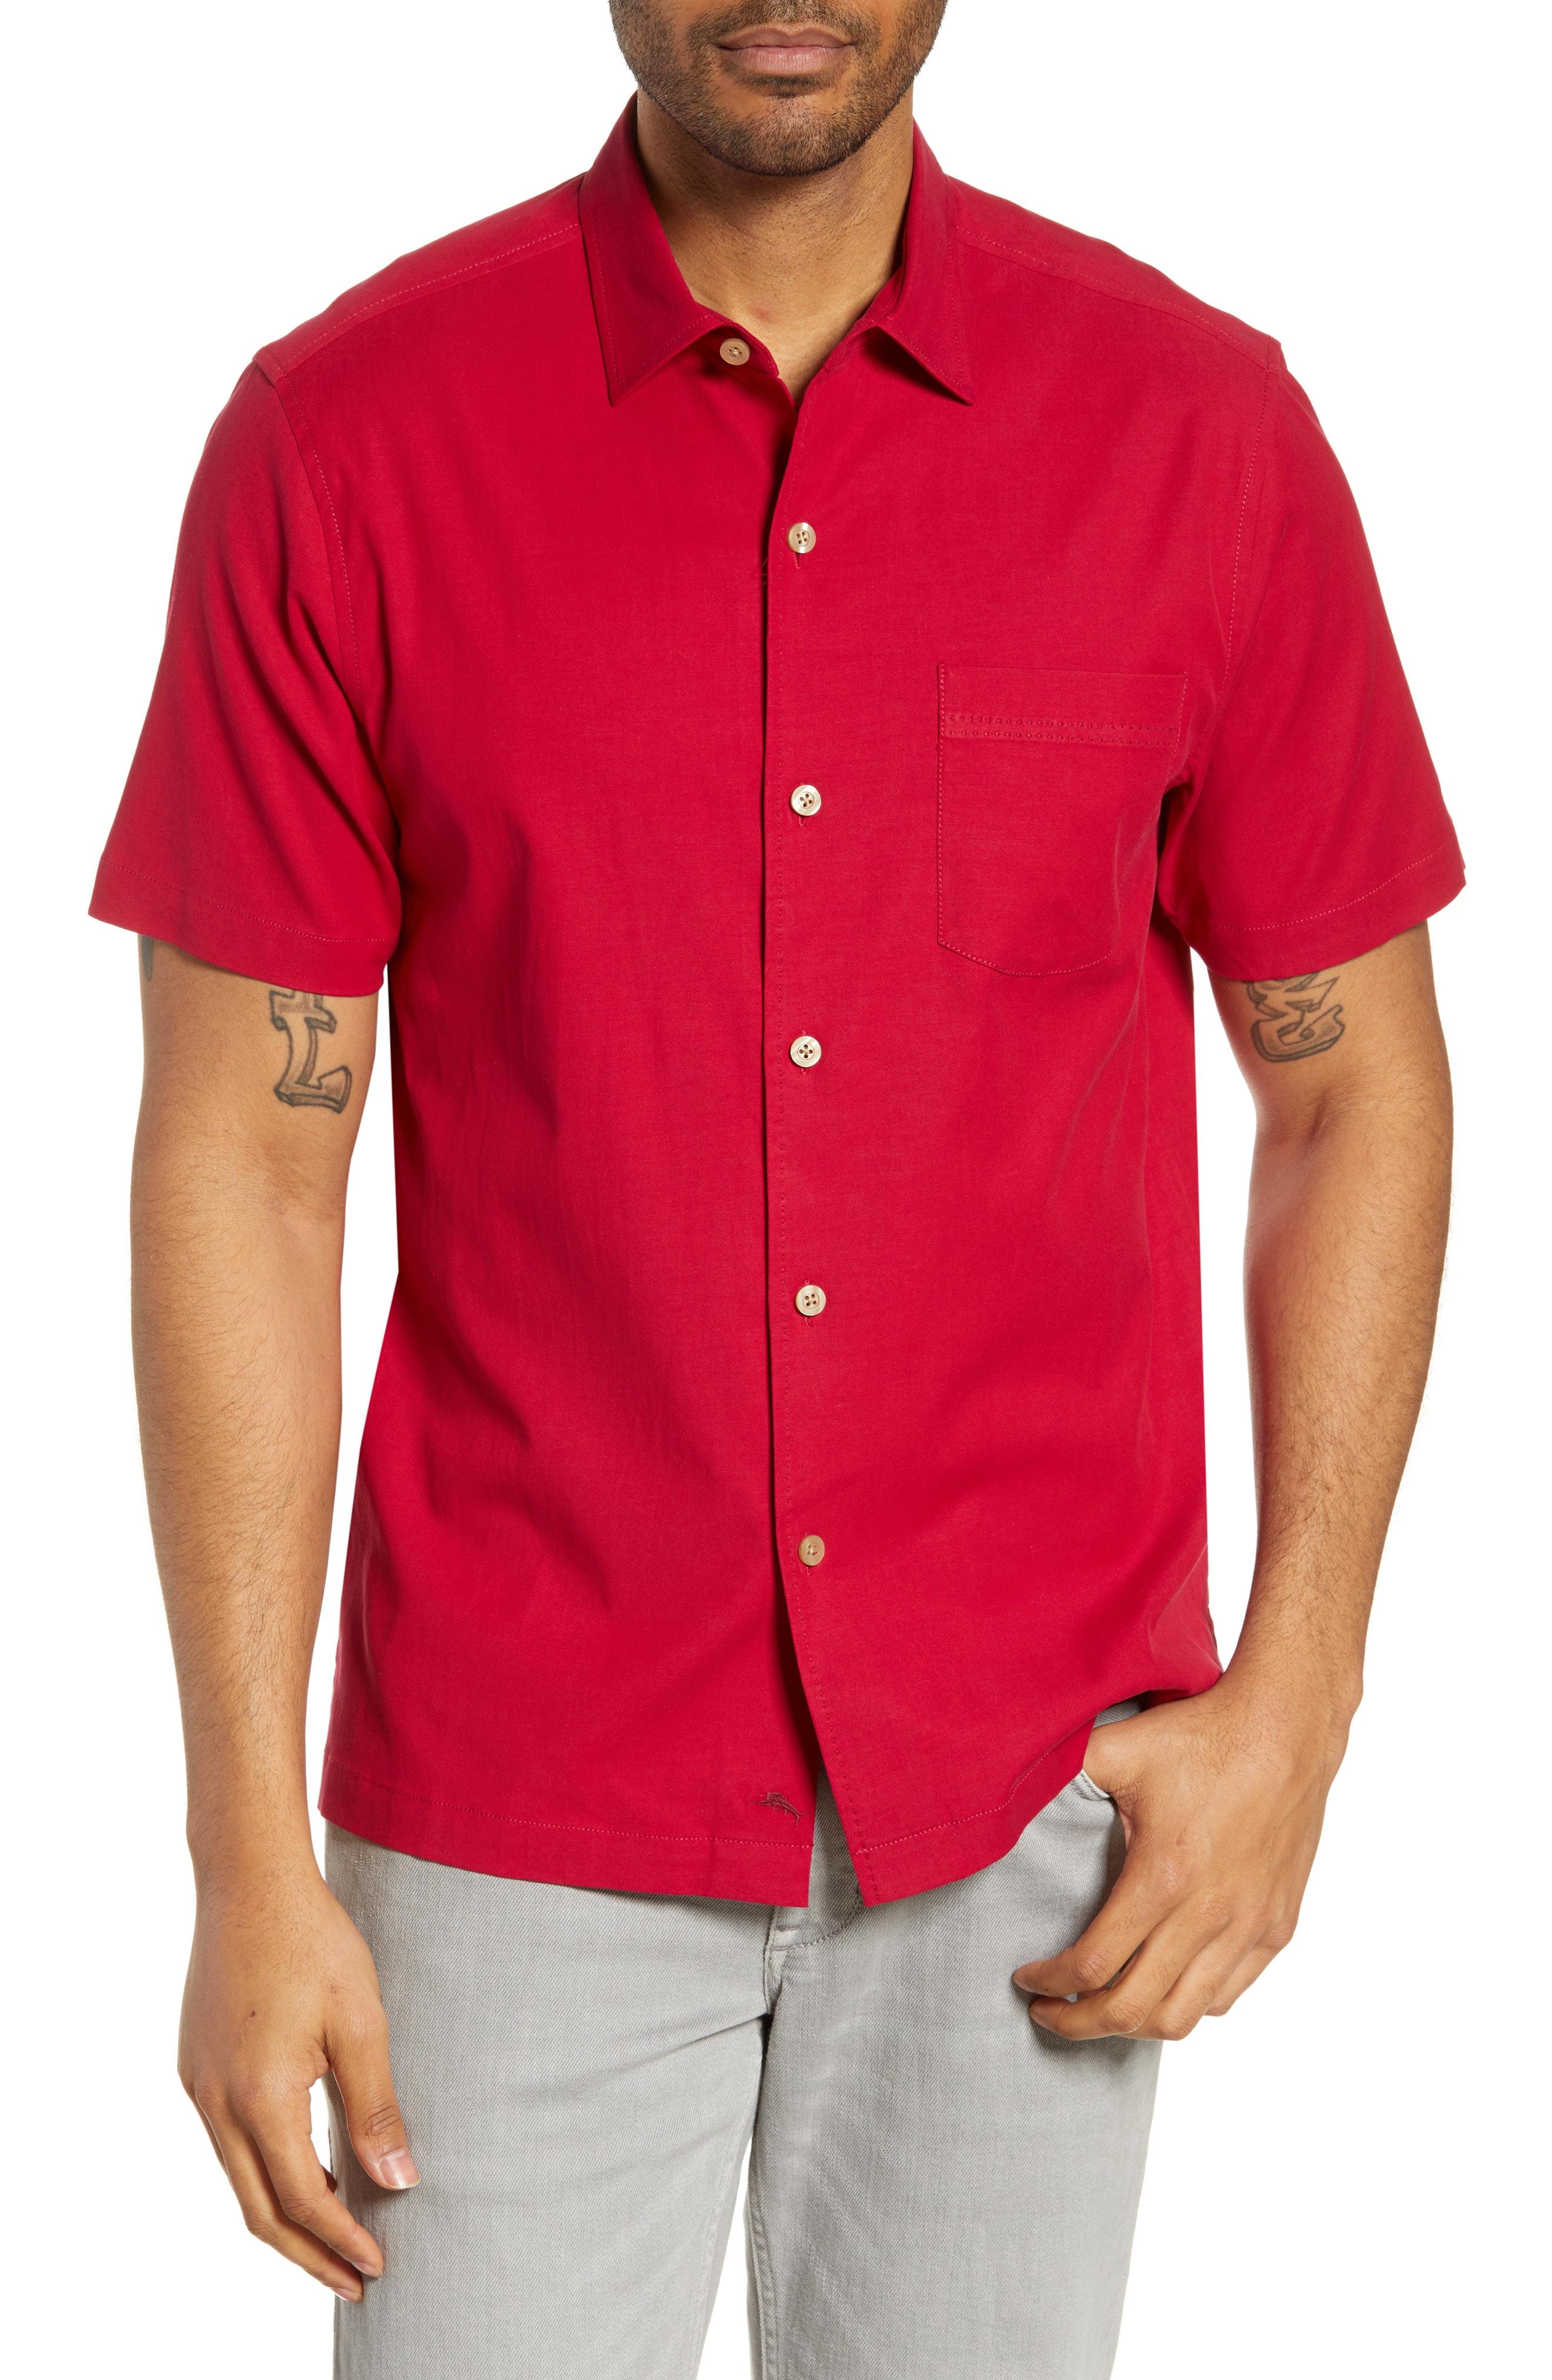 Lyst - Tommy Bahama Catalina Stretch Silk Blend Camp Shirt in Red for Men